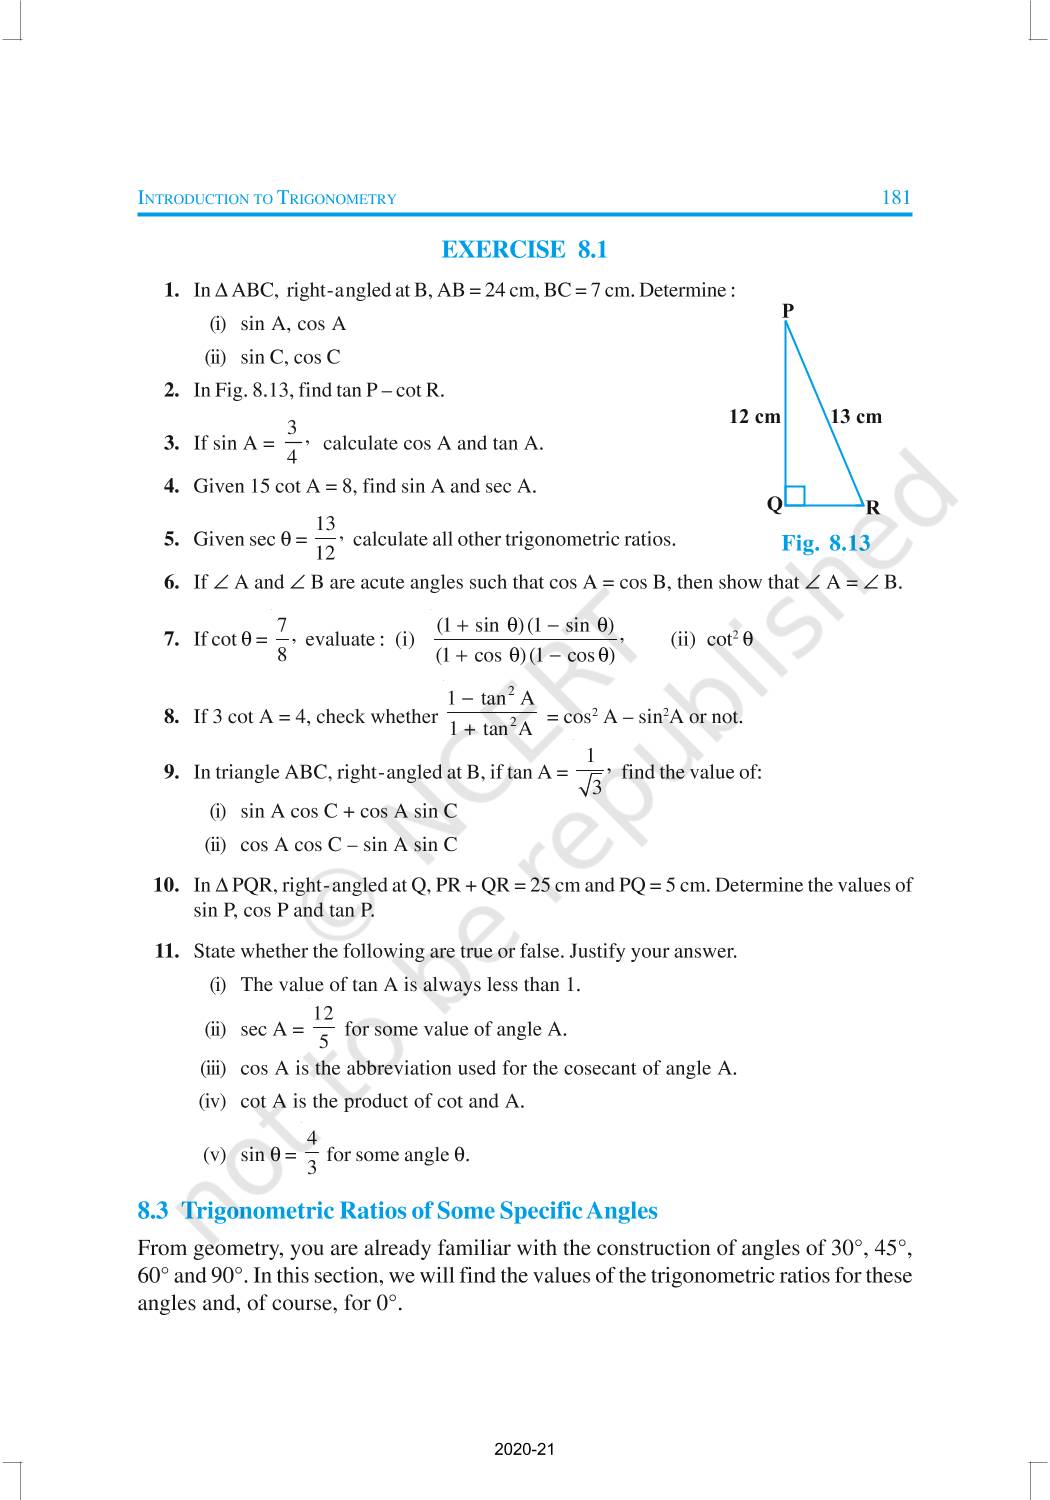 introduction to trigonometry assignment